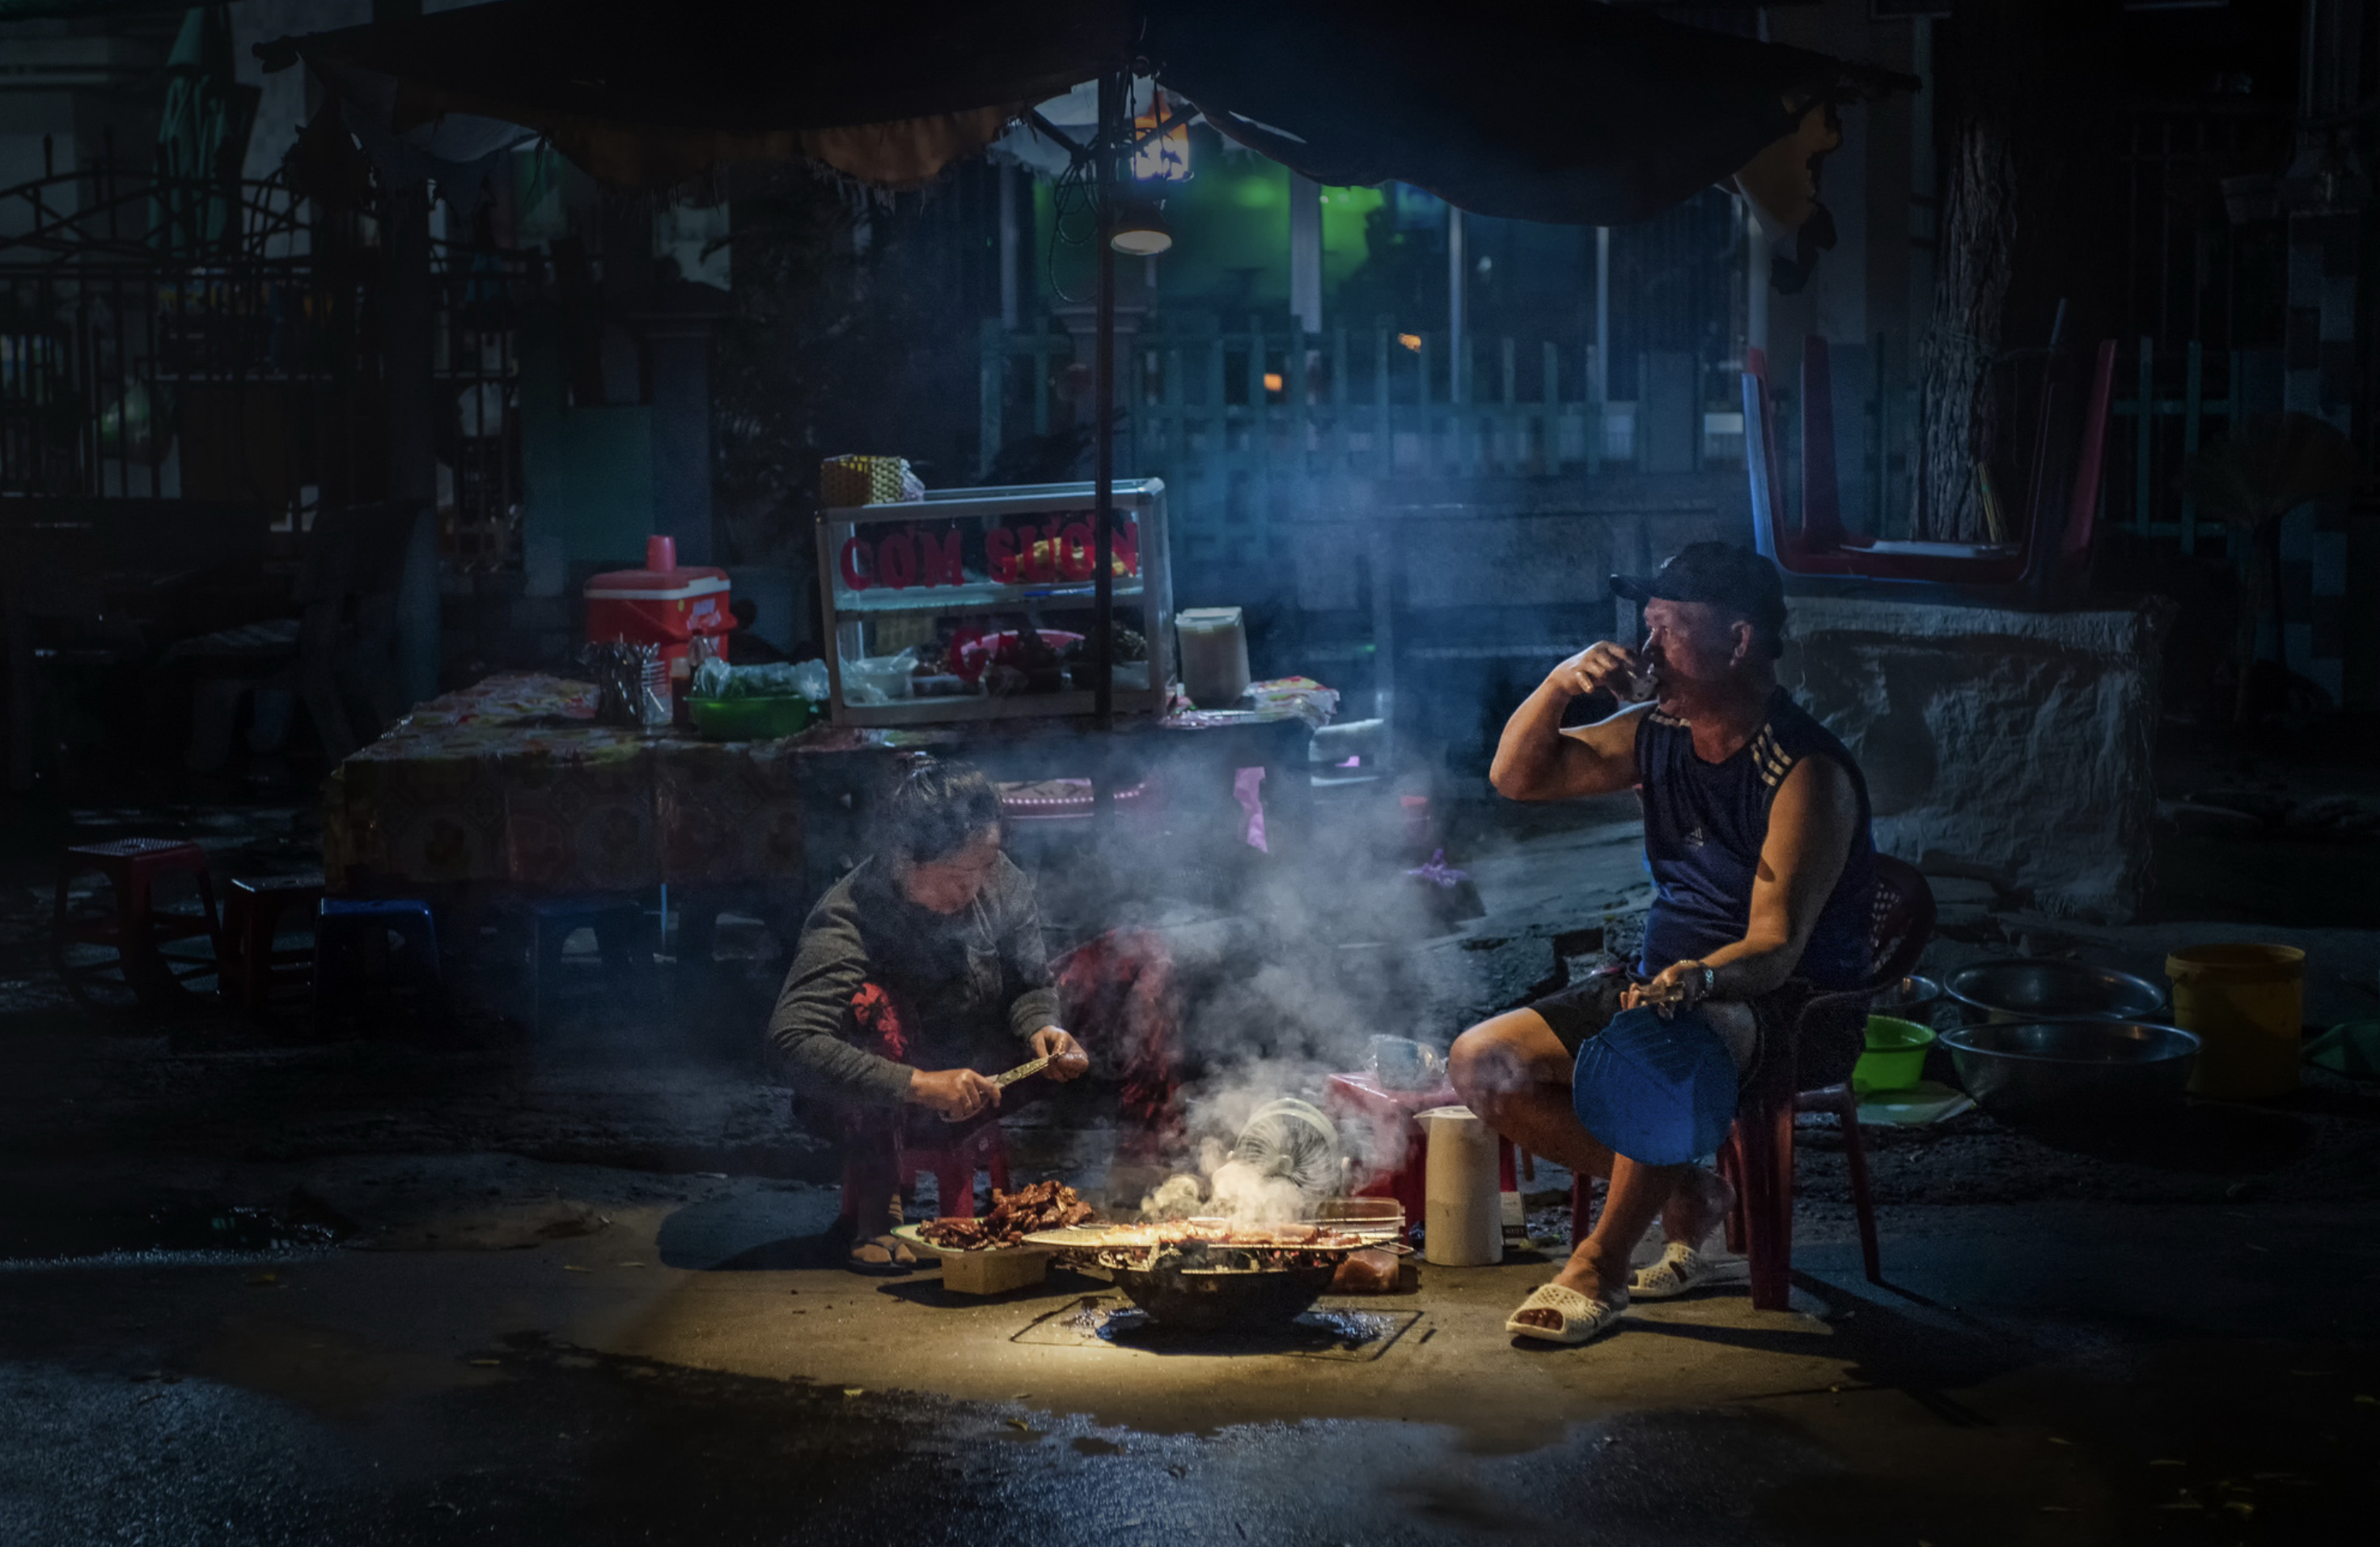 Eateries near My Tan Fishing Port in Ninh Thuan Province, south-central Vietnam are opened at the crack of dawn to serve fishermen after their fishing trips. Photo: Ly Hoang Long / Tuoi Tre